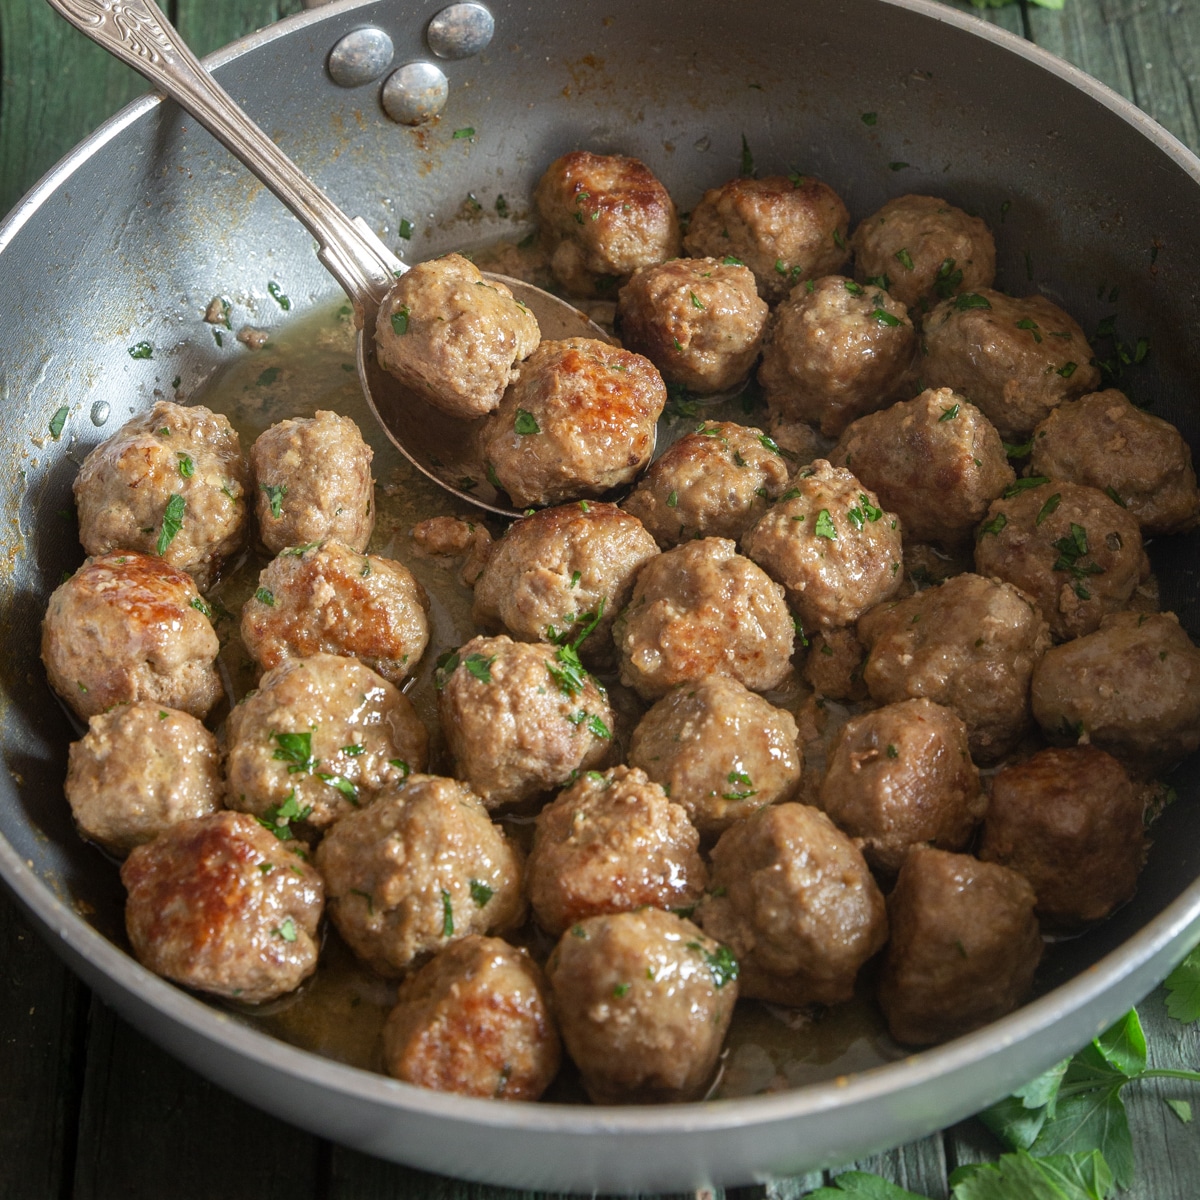 Meatballs in a silver frying pan with a spoon.